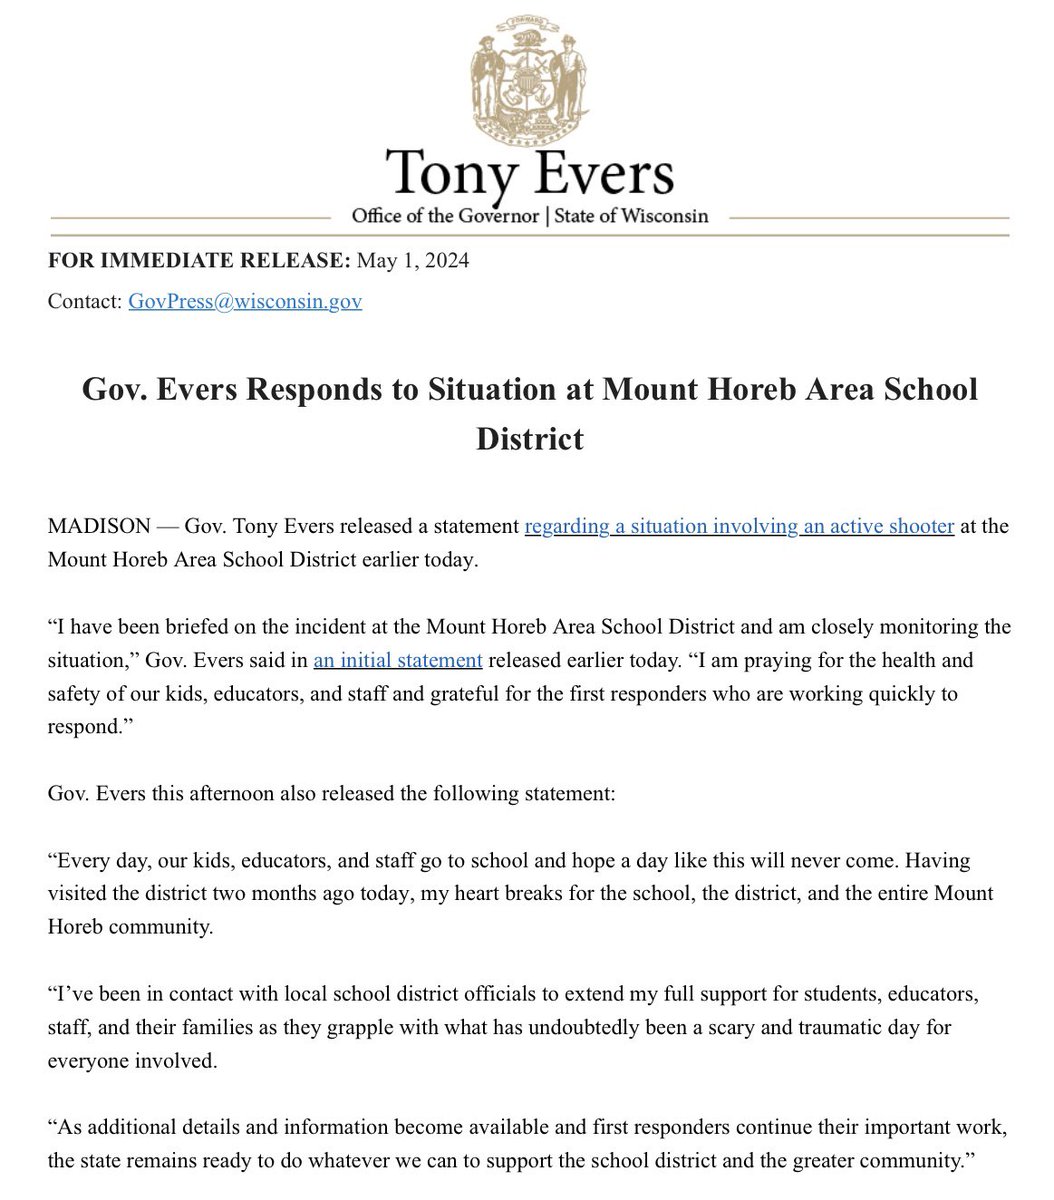 My full statement regarding the situation at the Mount Horeb Area School District today.